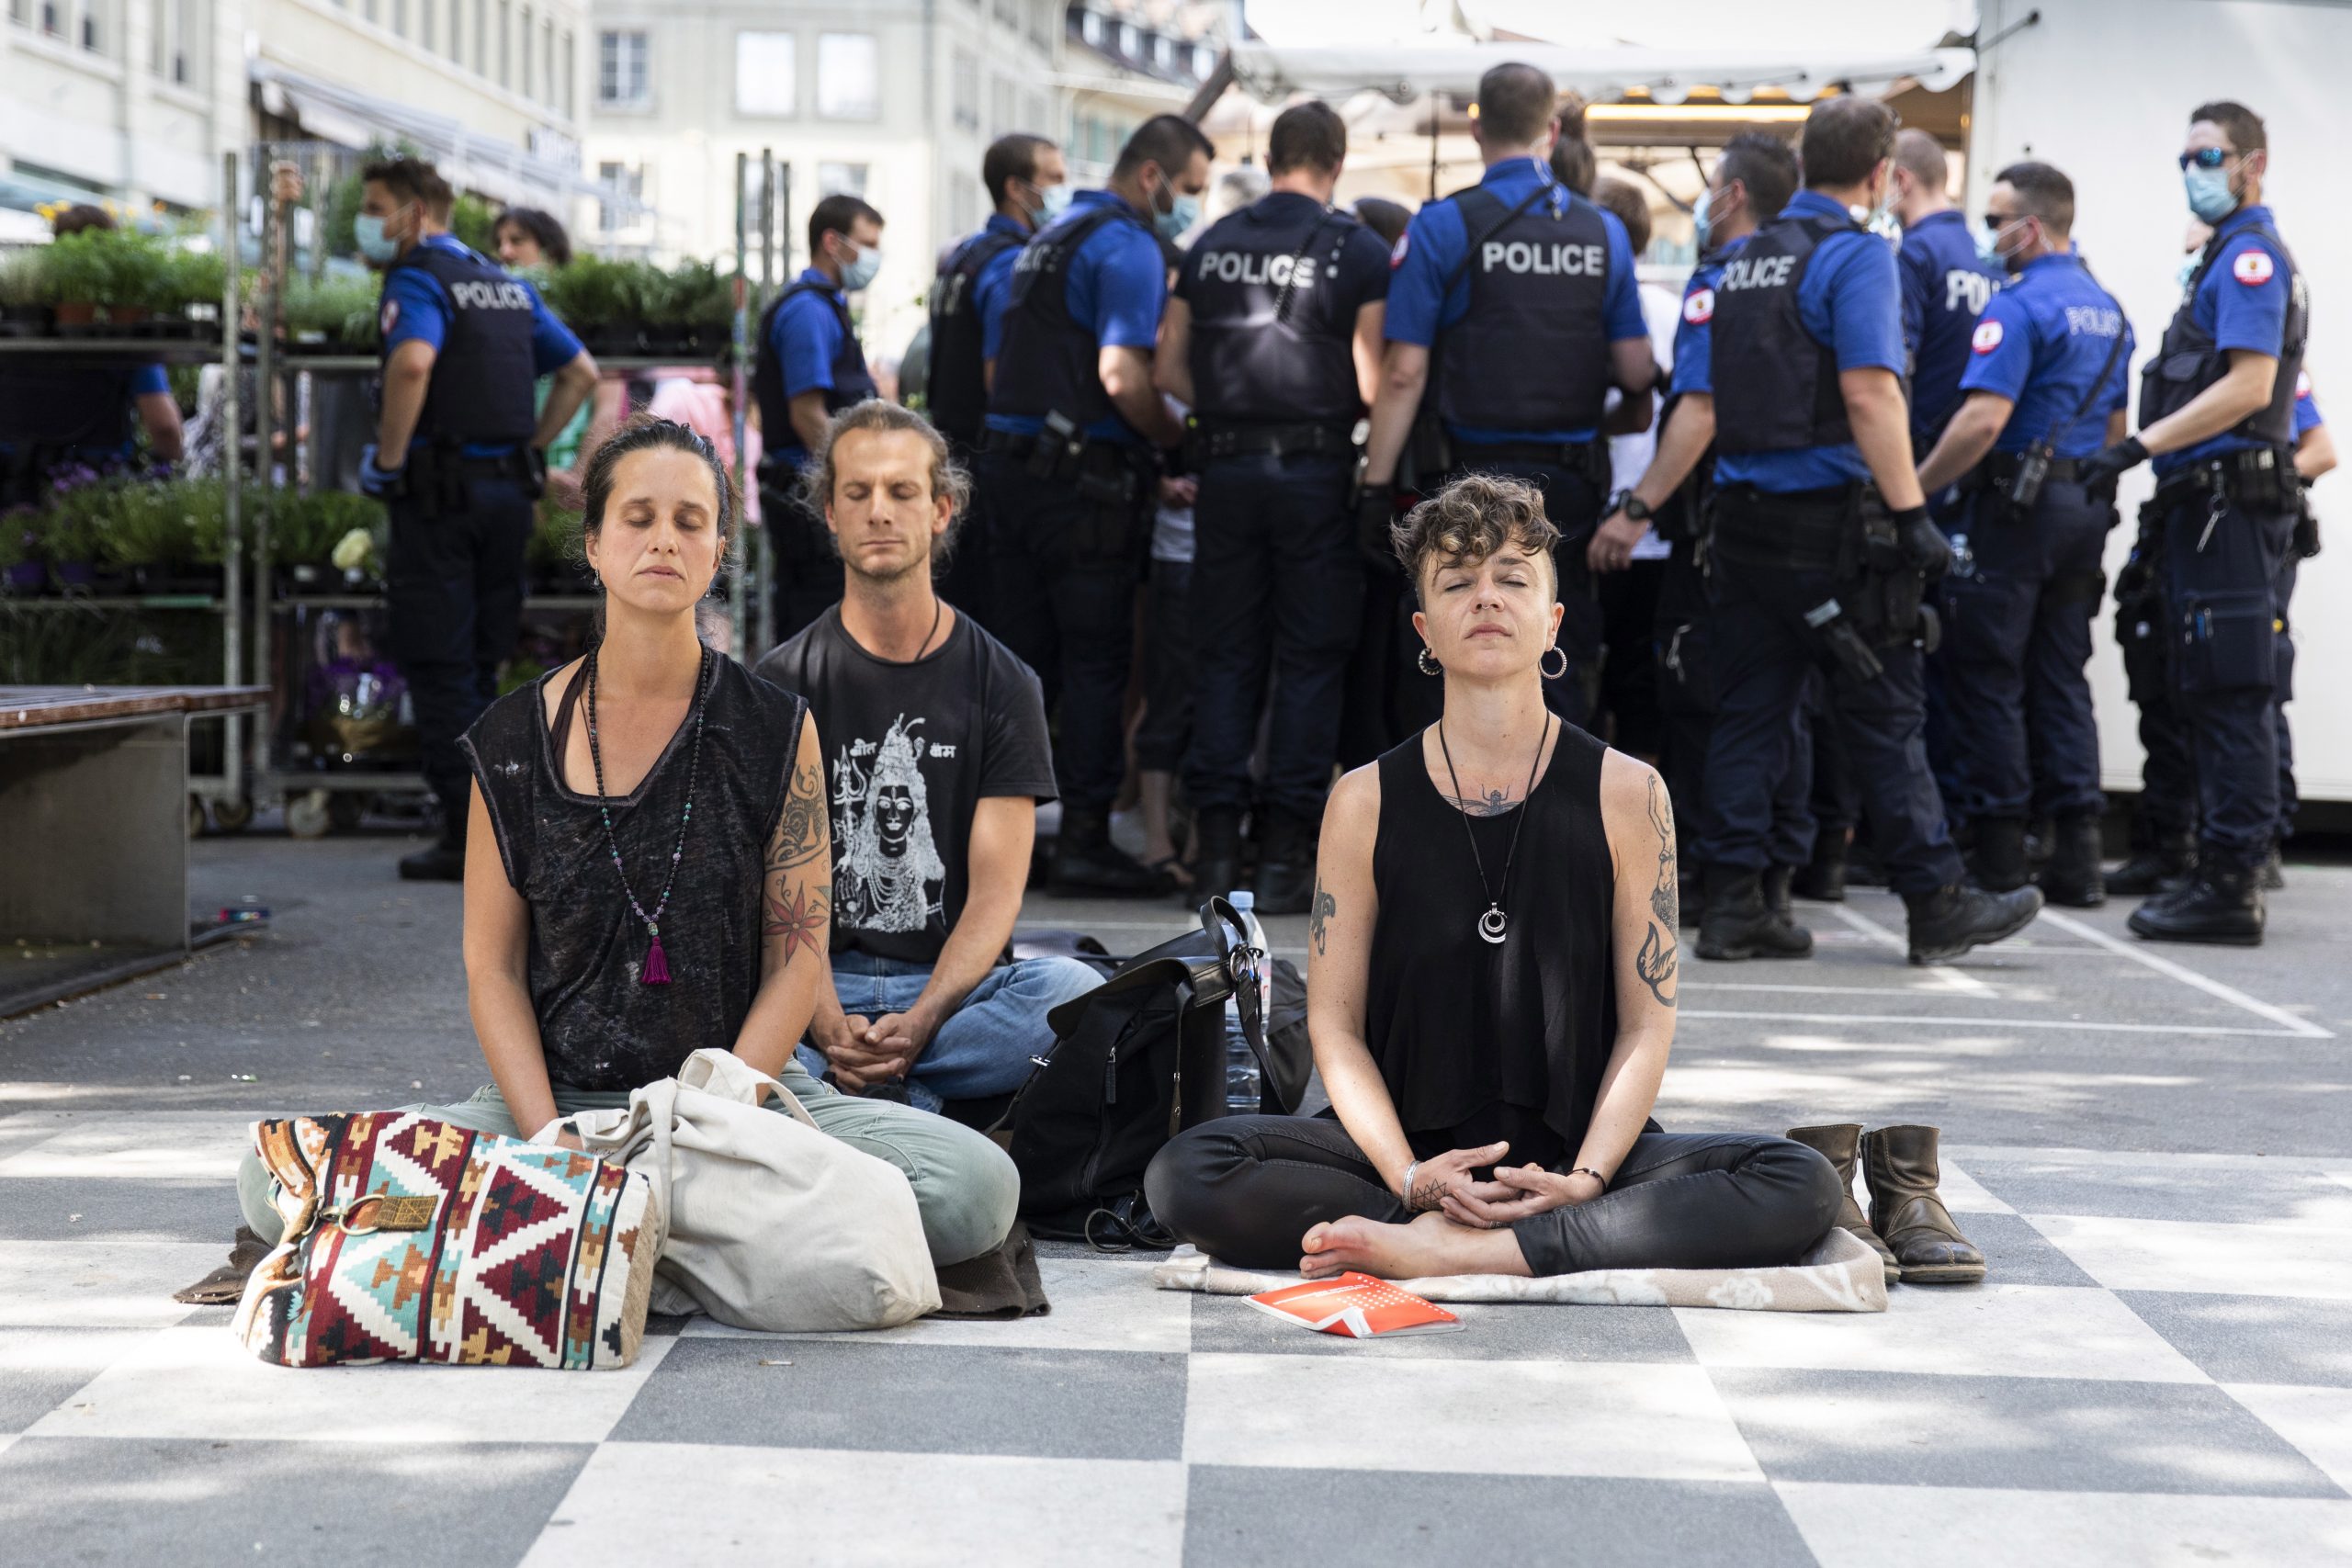 epa08412119 Demonstrators sit on the ground and refuse to leave, while several hundred demonstrators gathered to protest against the ongoing Corona-Lockdown, in the center of Bern, Switzerland, 09 May 2020. The demonstrators asked for more freedom and personal responsibility. The police tried to end the demonstration but refrained to use force to dissolve it.  EPA/PETER KLAUNZER